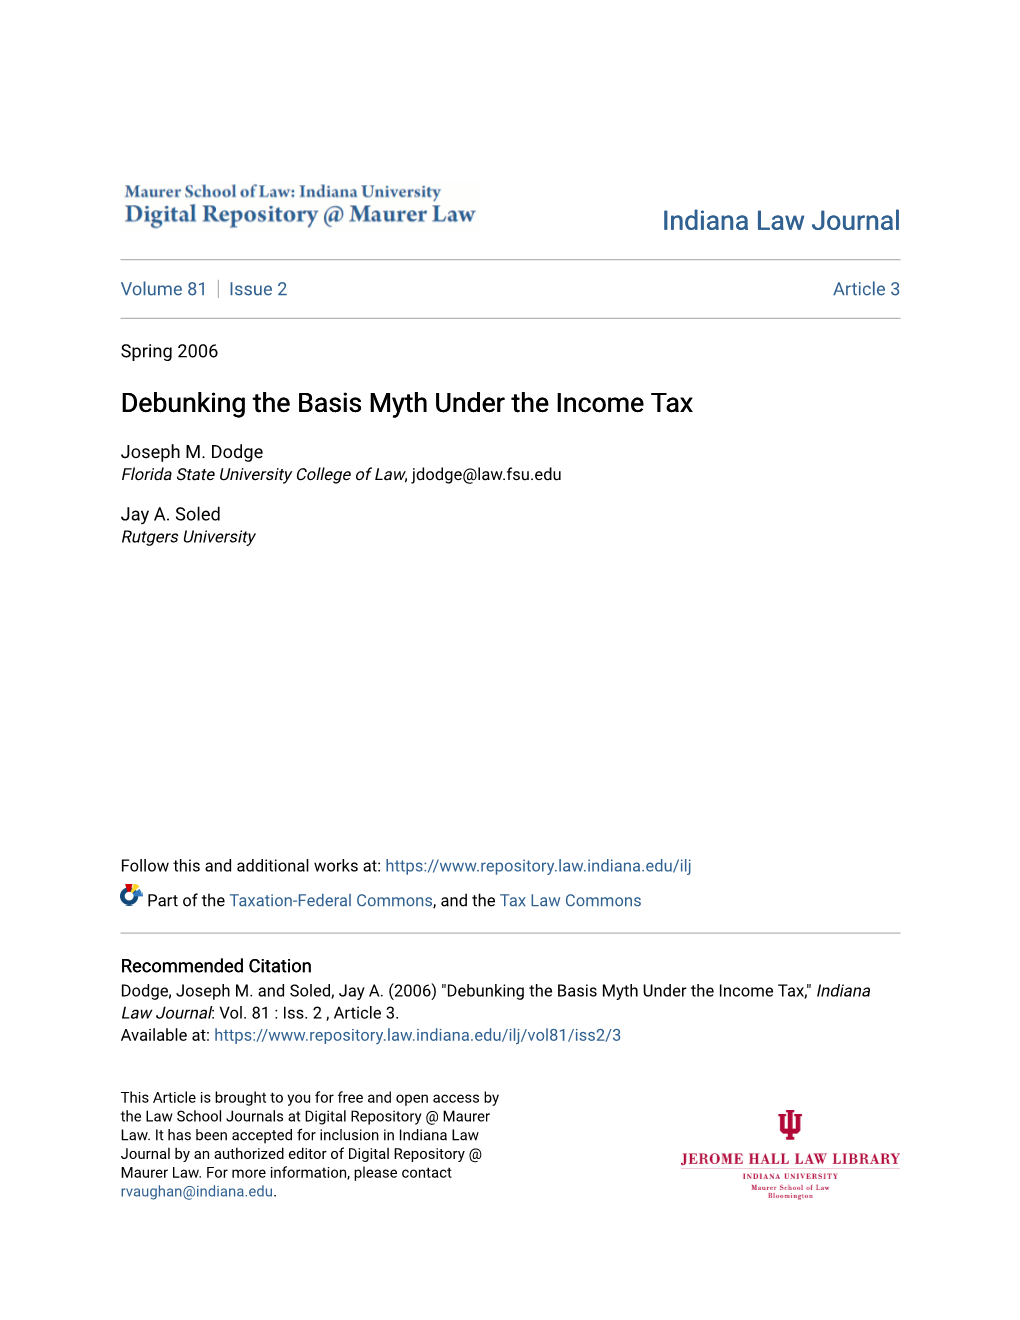 Debunking the Basis Myth Under the Income Tax